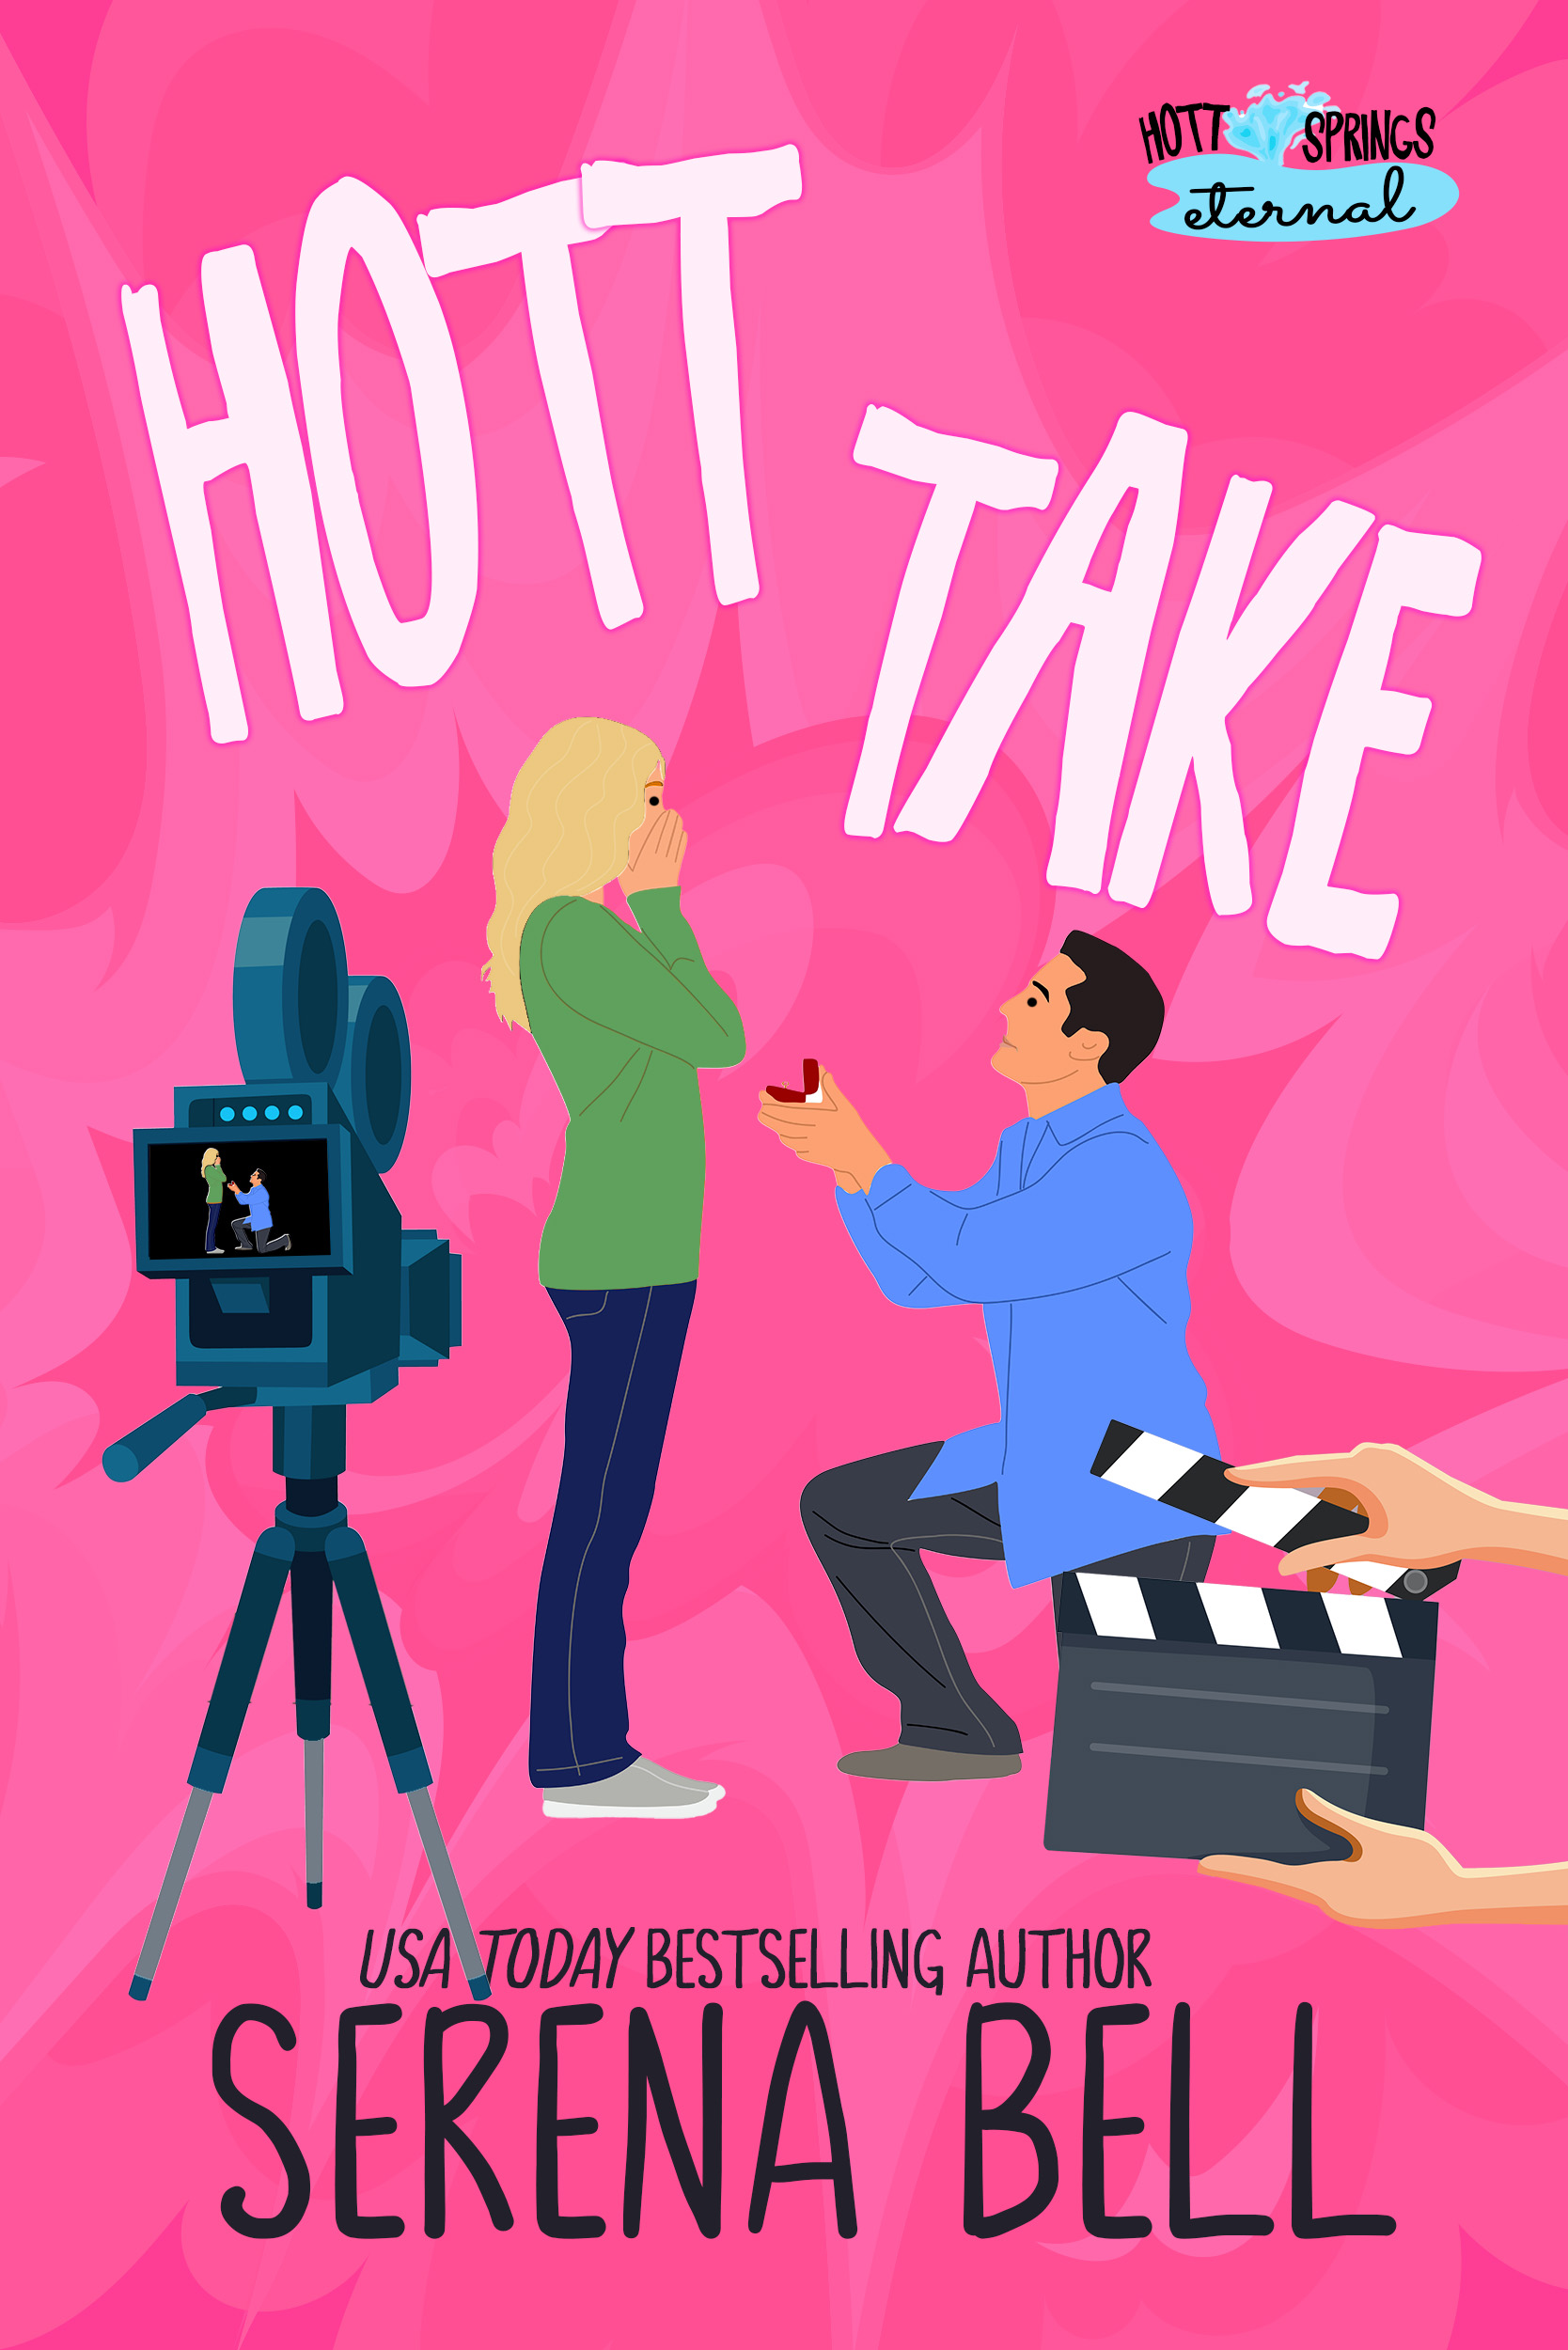 Hott Take by Serena Bell